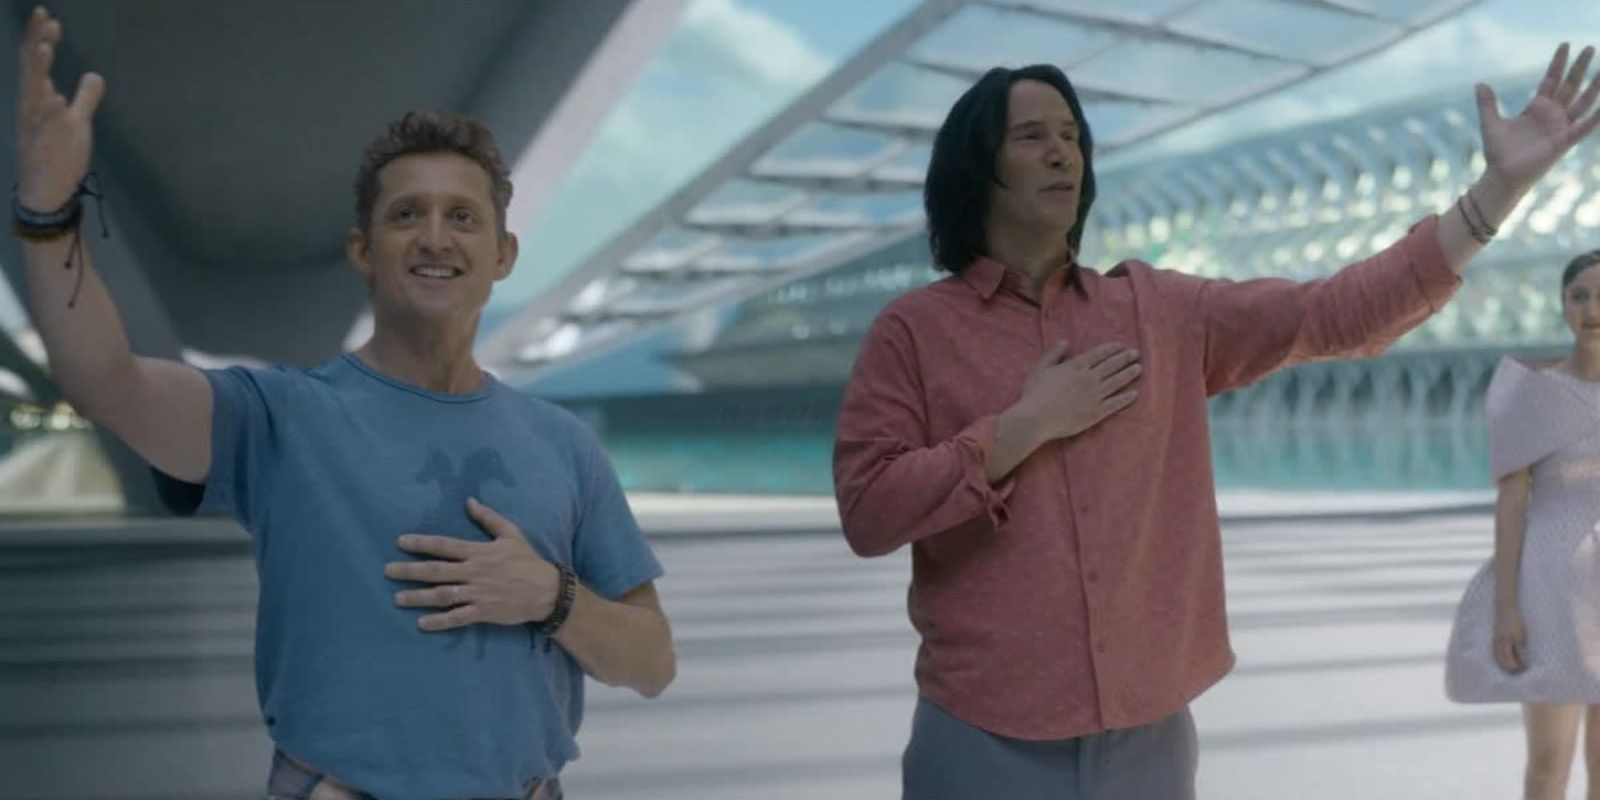 bill and ted 3, Face the music, Keanu Reeves, Alex WInter